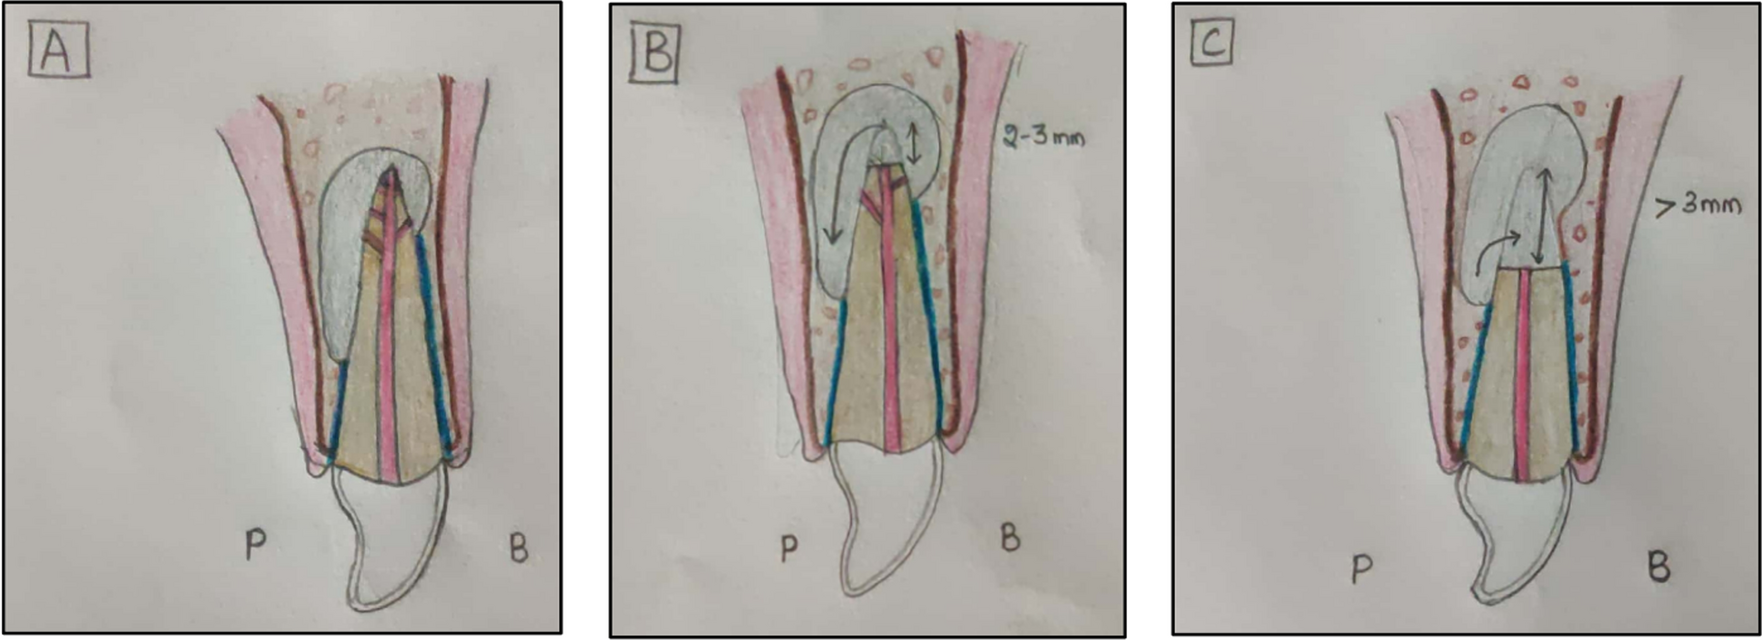 Root End Resection in Periapical Surgeries: A Contention of Opinion Between an Oral Surgeon and an Endodontist